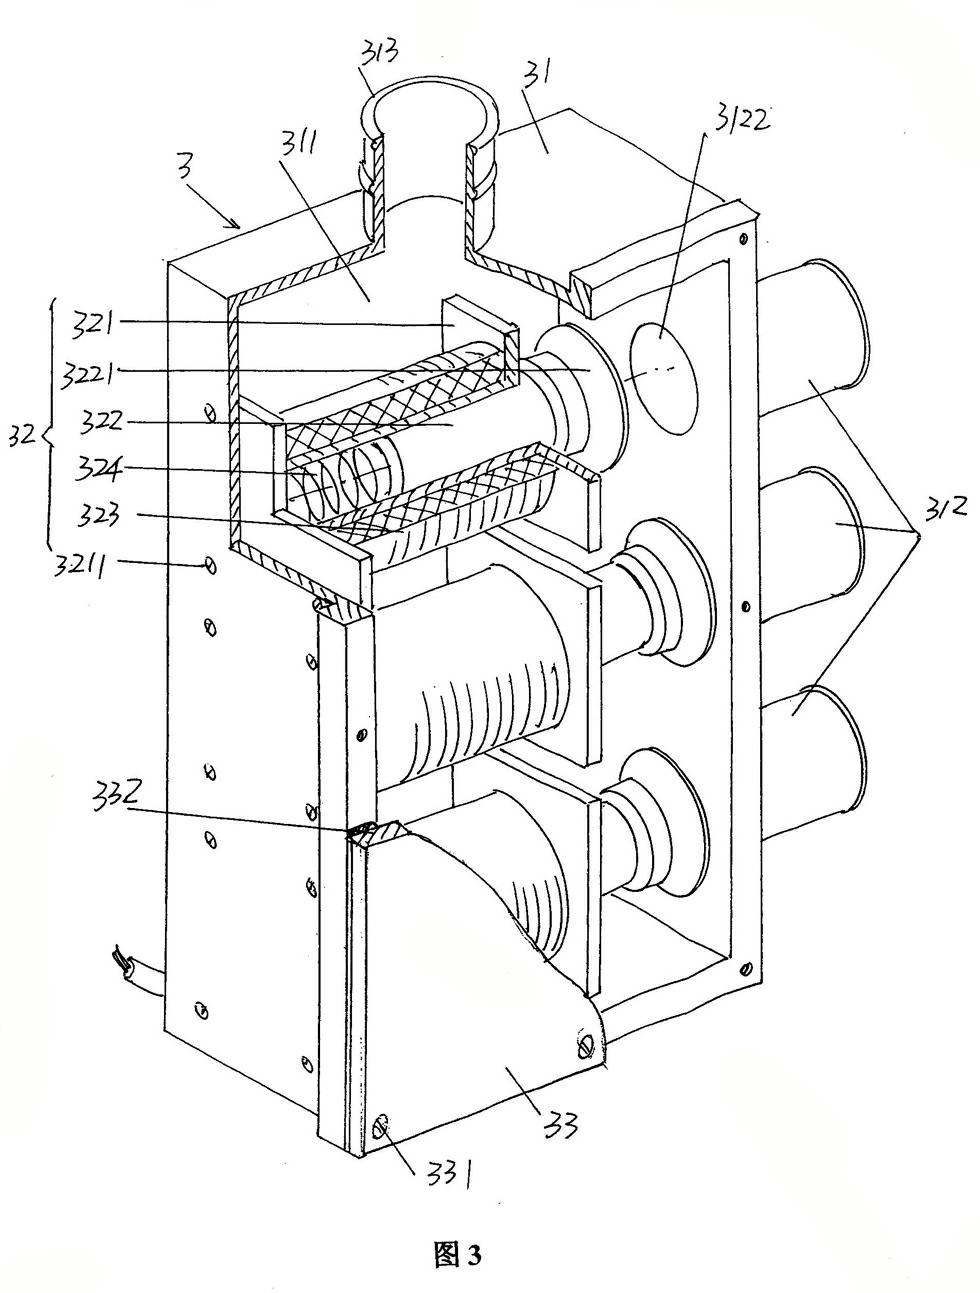 Wearing device for pneumatic expectoration device